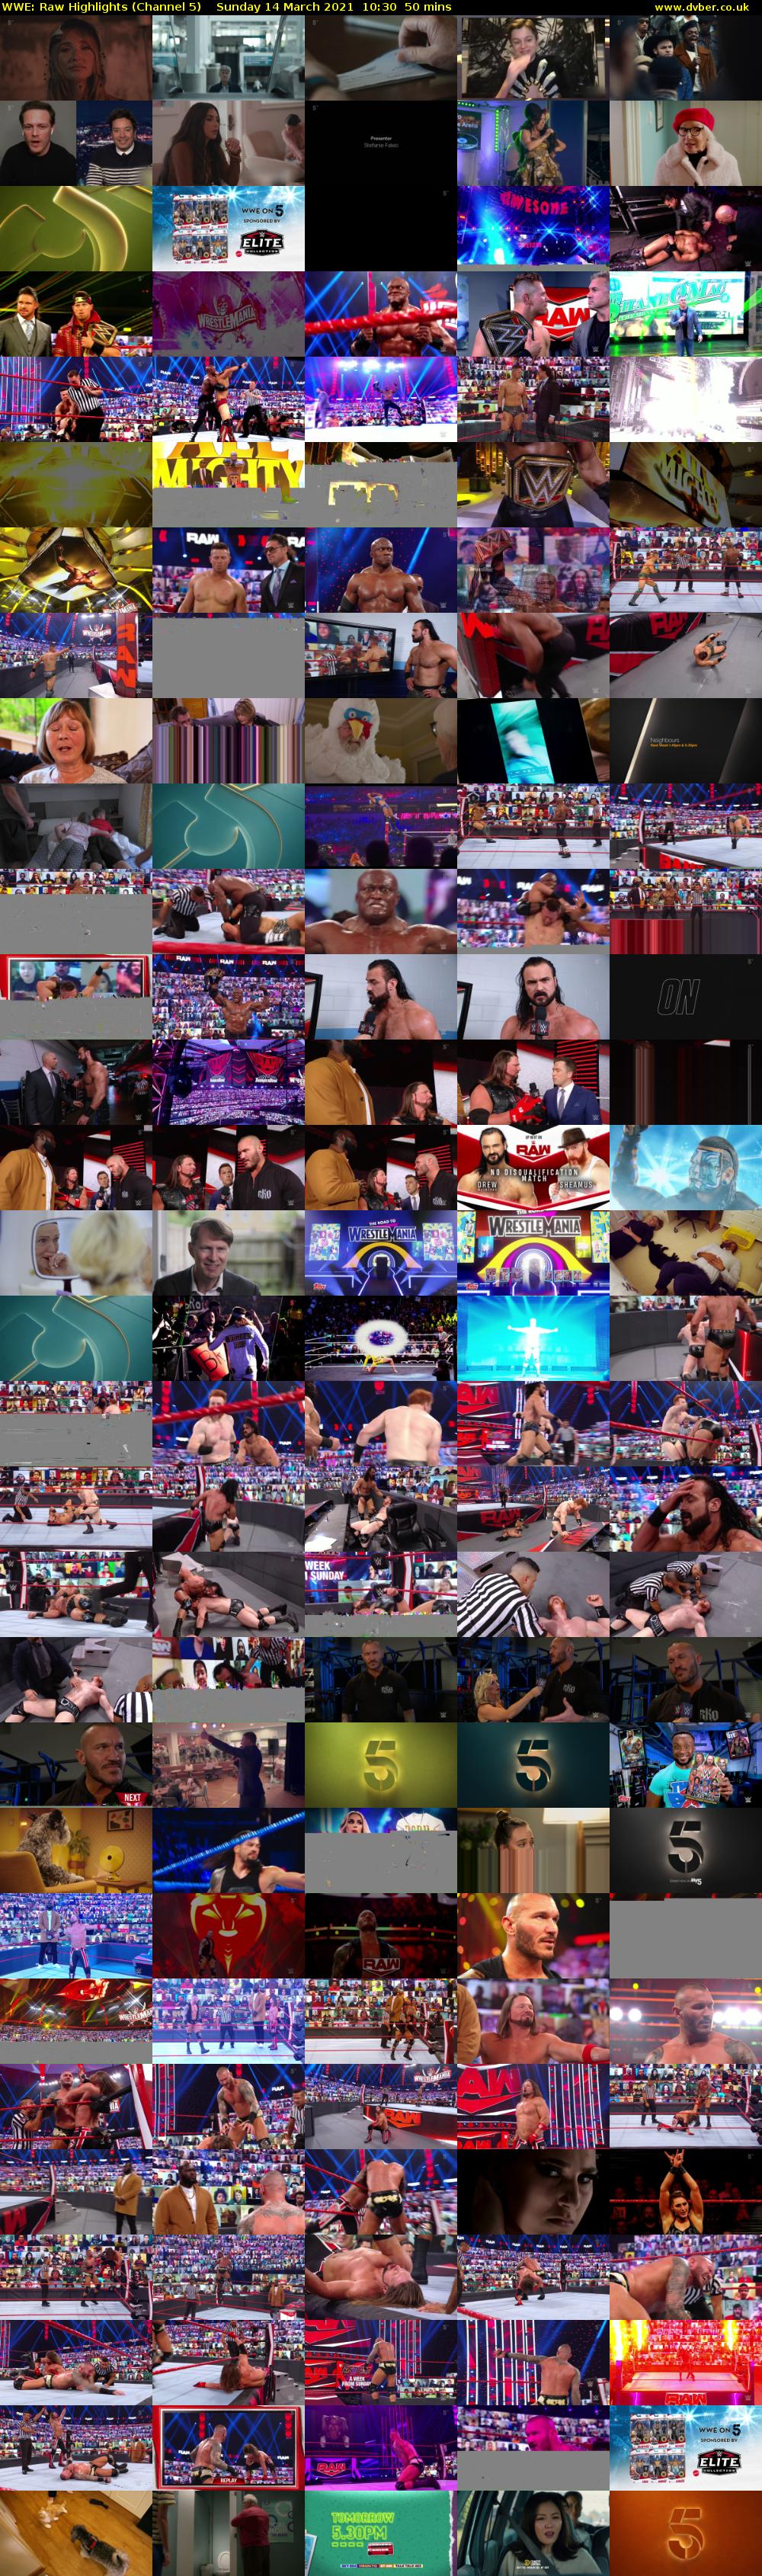 WWE: Raw Highlights (Channel 5) Sunday 14 March 2021 10:30 - 11:20